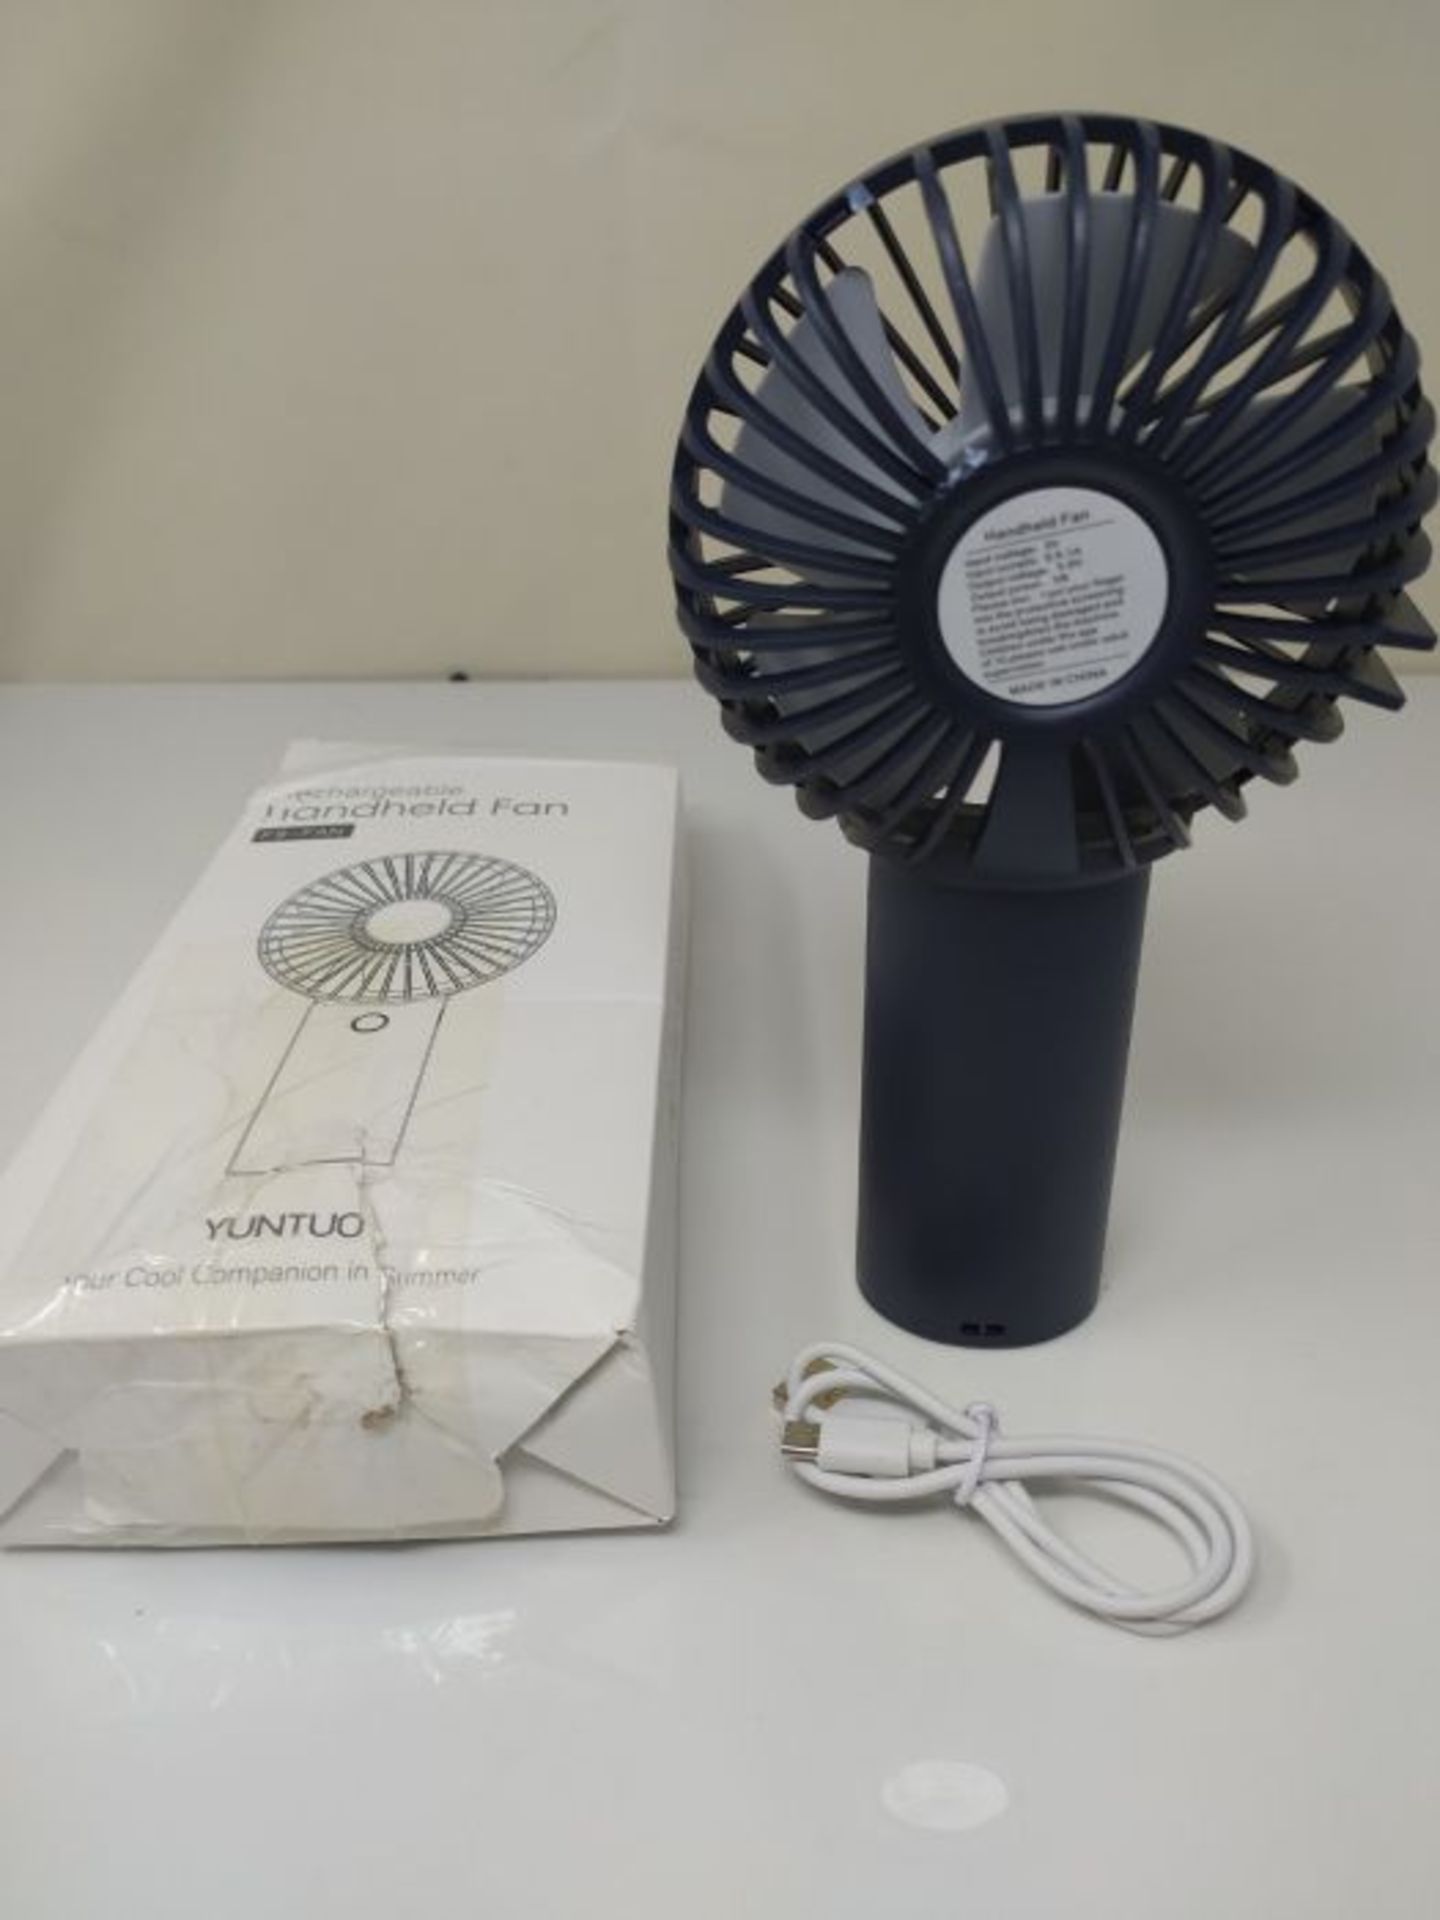 YunTuo Mini Portable Handheld Fan with 4000 mAh Rechargeable Battery, 3 Speeds Persona - Image 2 of 2